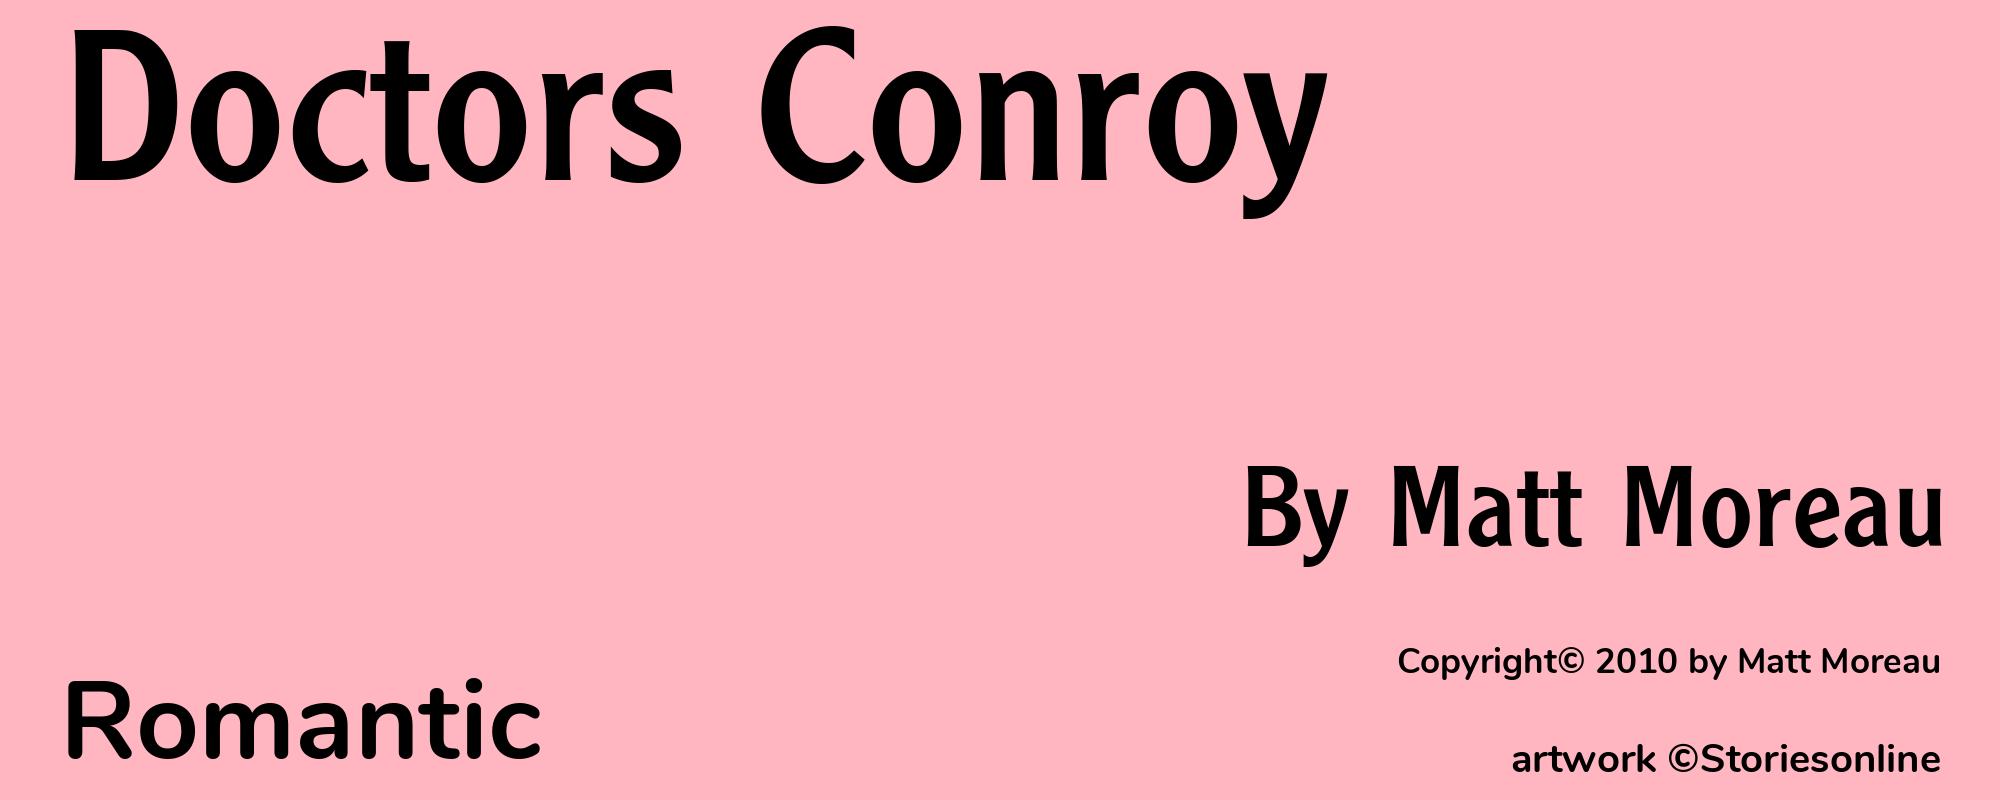 Doctors Conroy - Cover